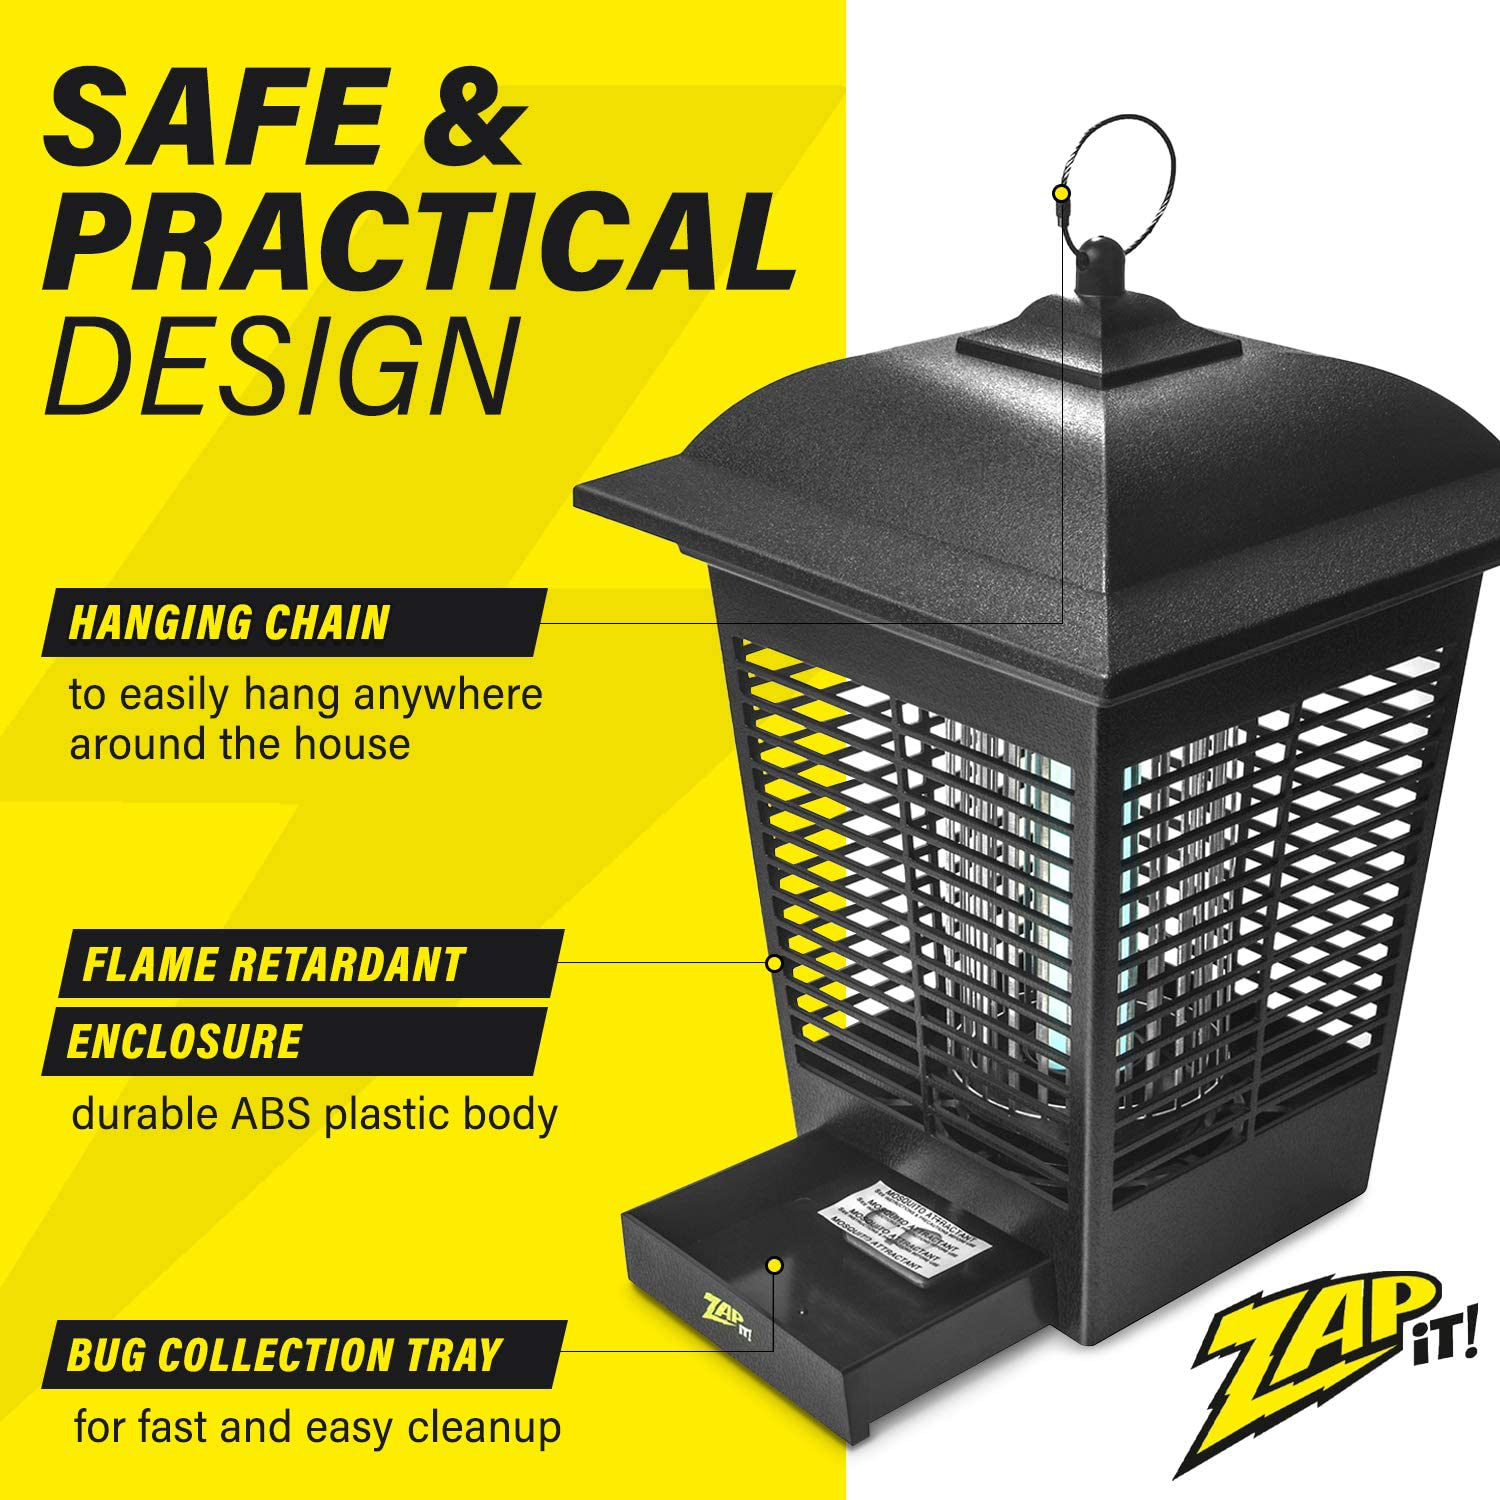 ZAP IT! Electric Indoor/Outdoor Bug Zapper (3,000 Volt) Waterproof 360 Degree Mosquito, Bug, and Insect Killer - Non-Toxic Attractant UV Light and Electric Shock - Bug Collector to Easily Clean